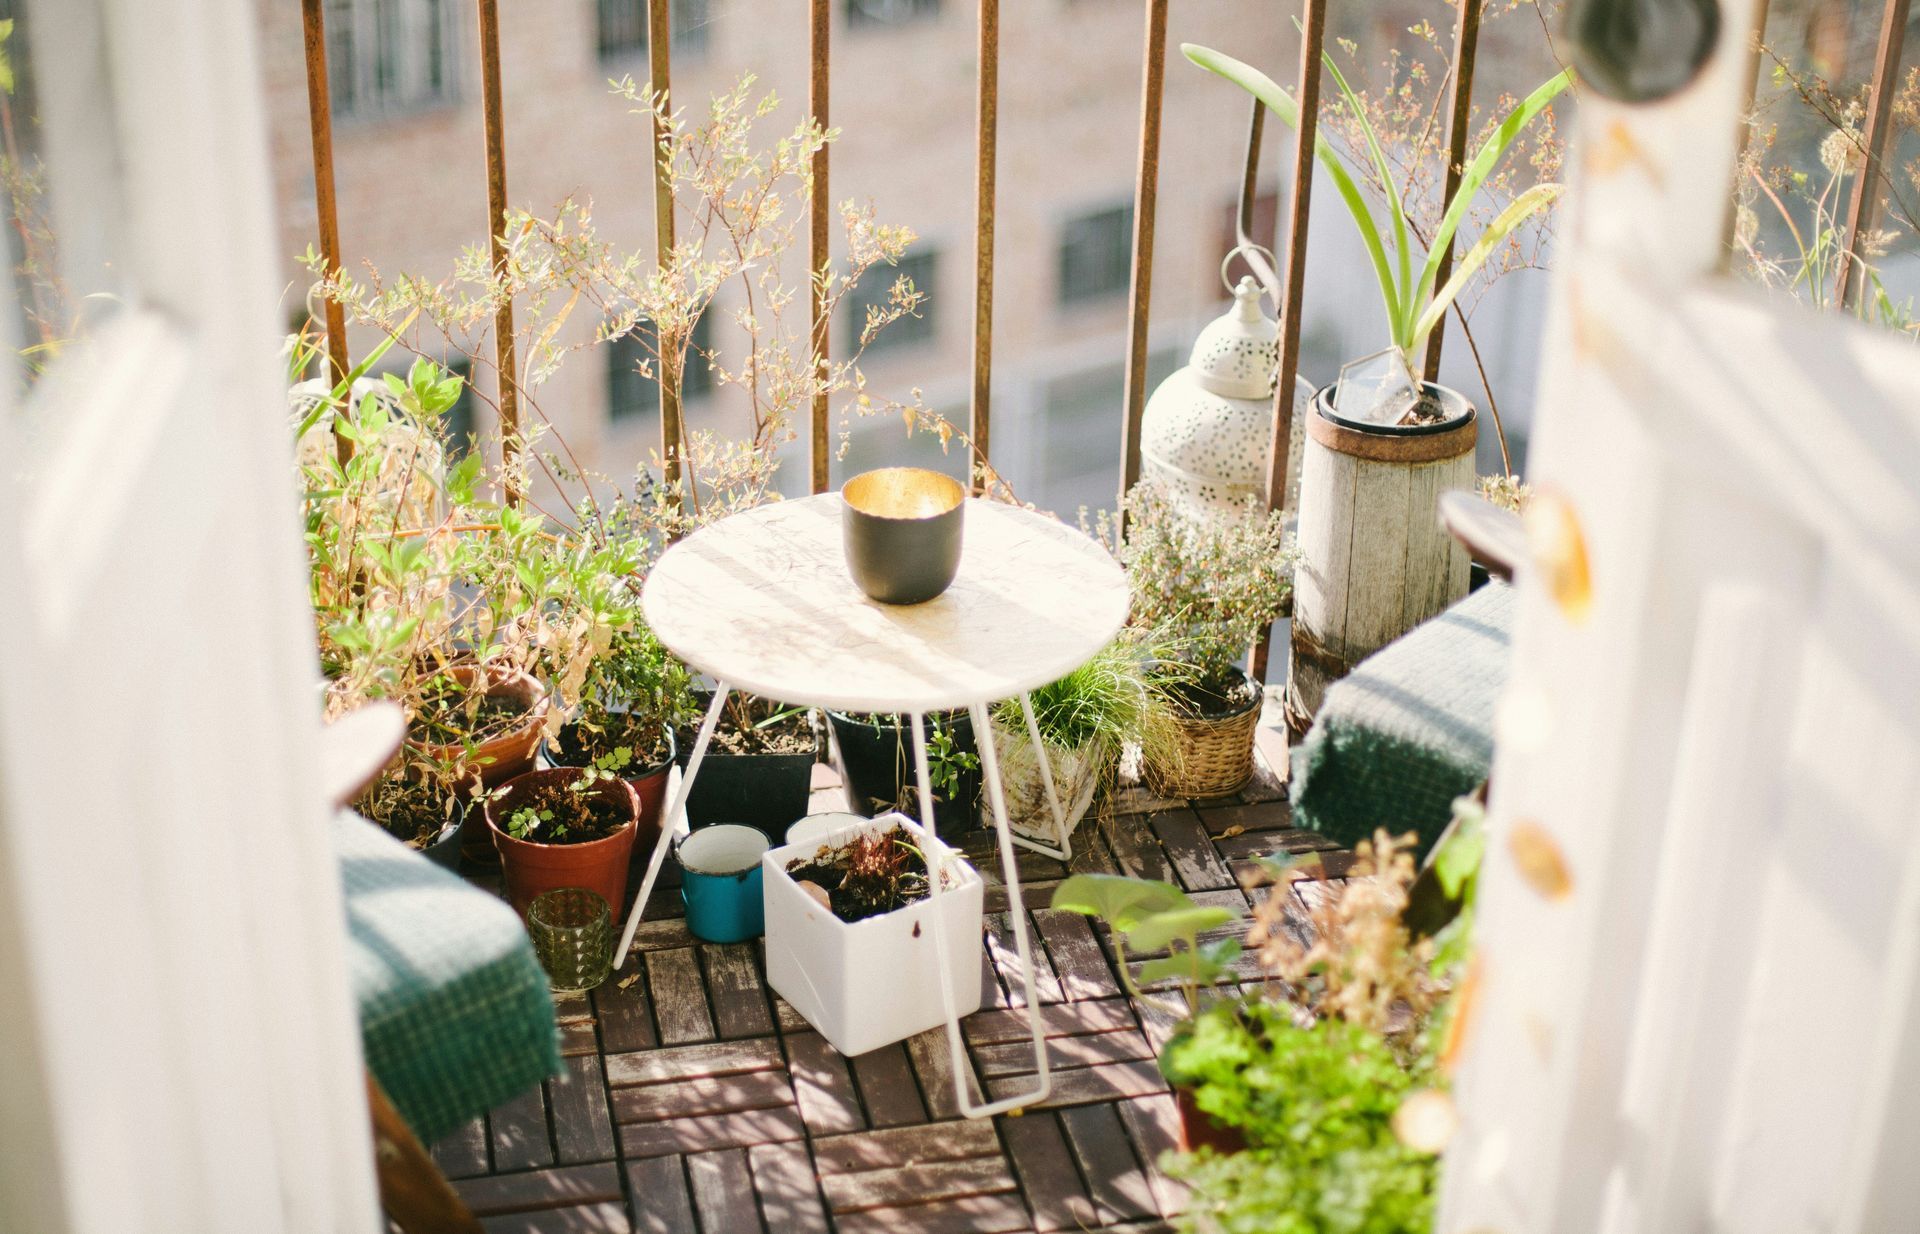 A small balcony with a table and potted plants.